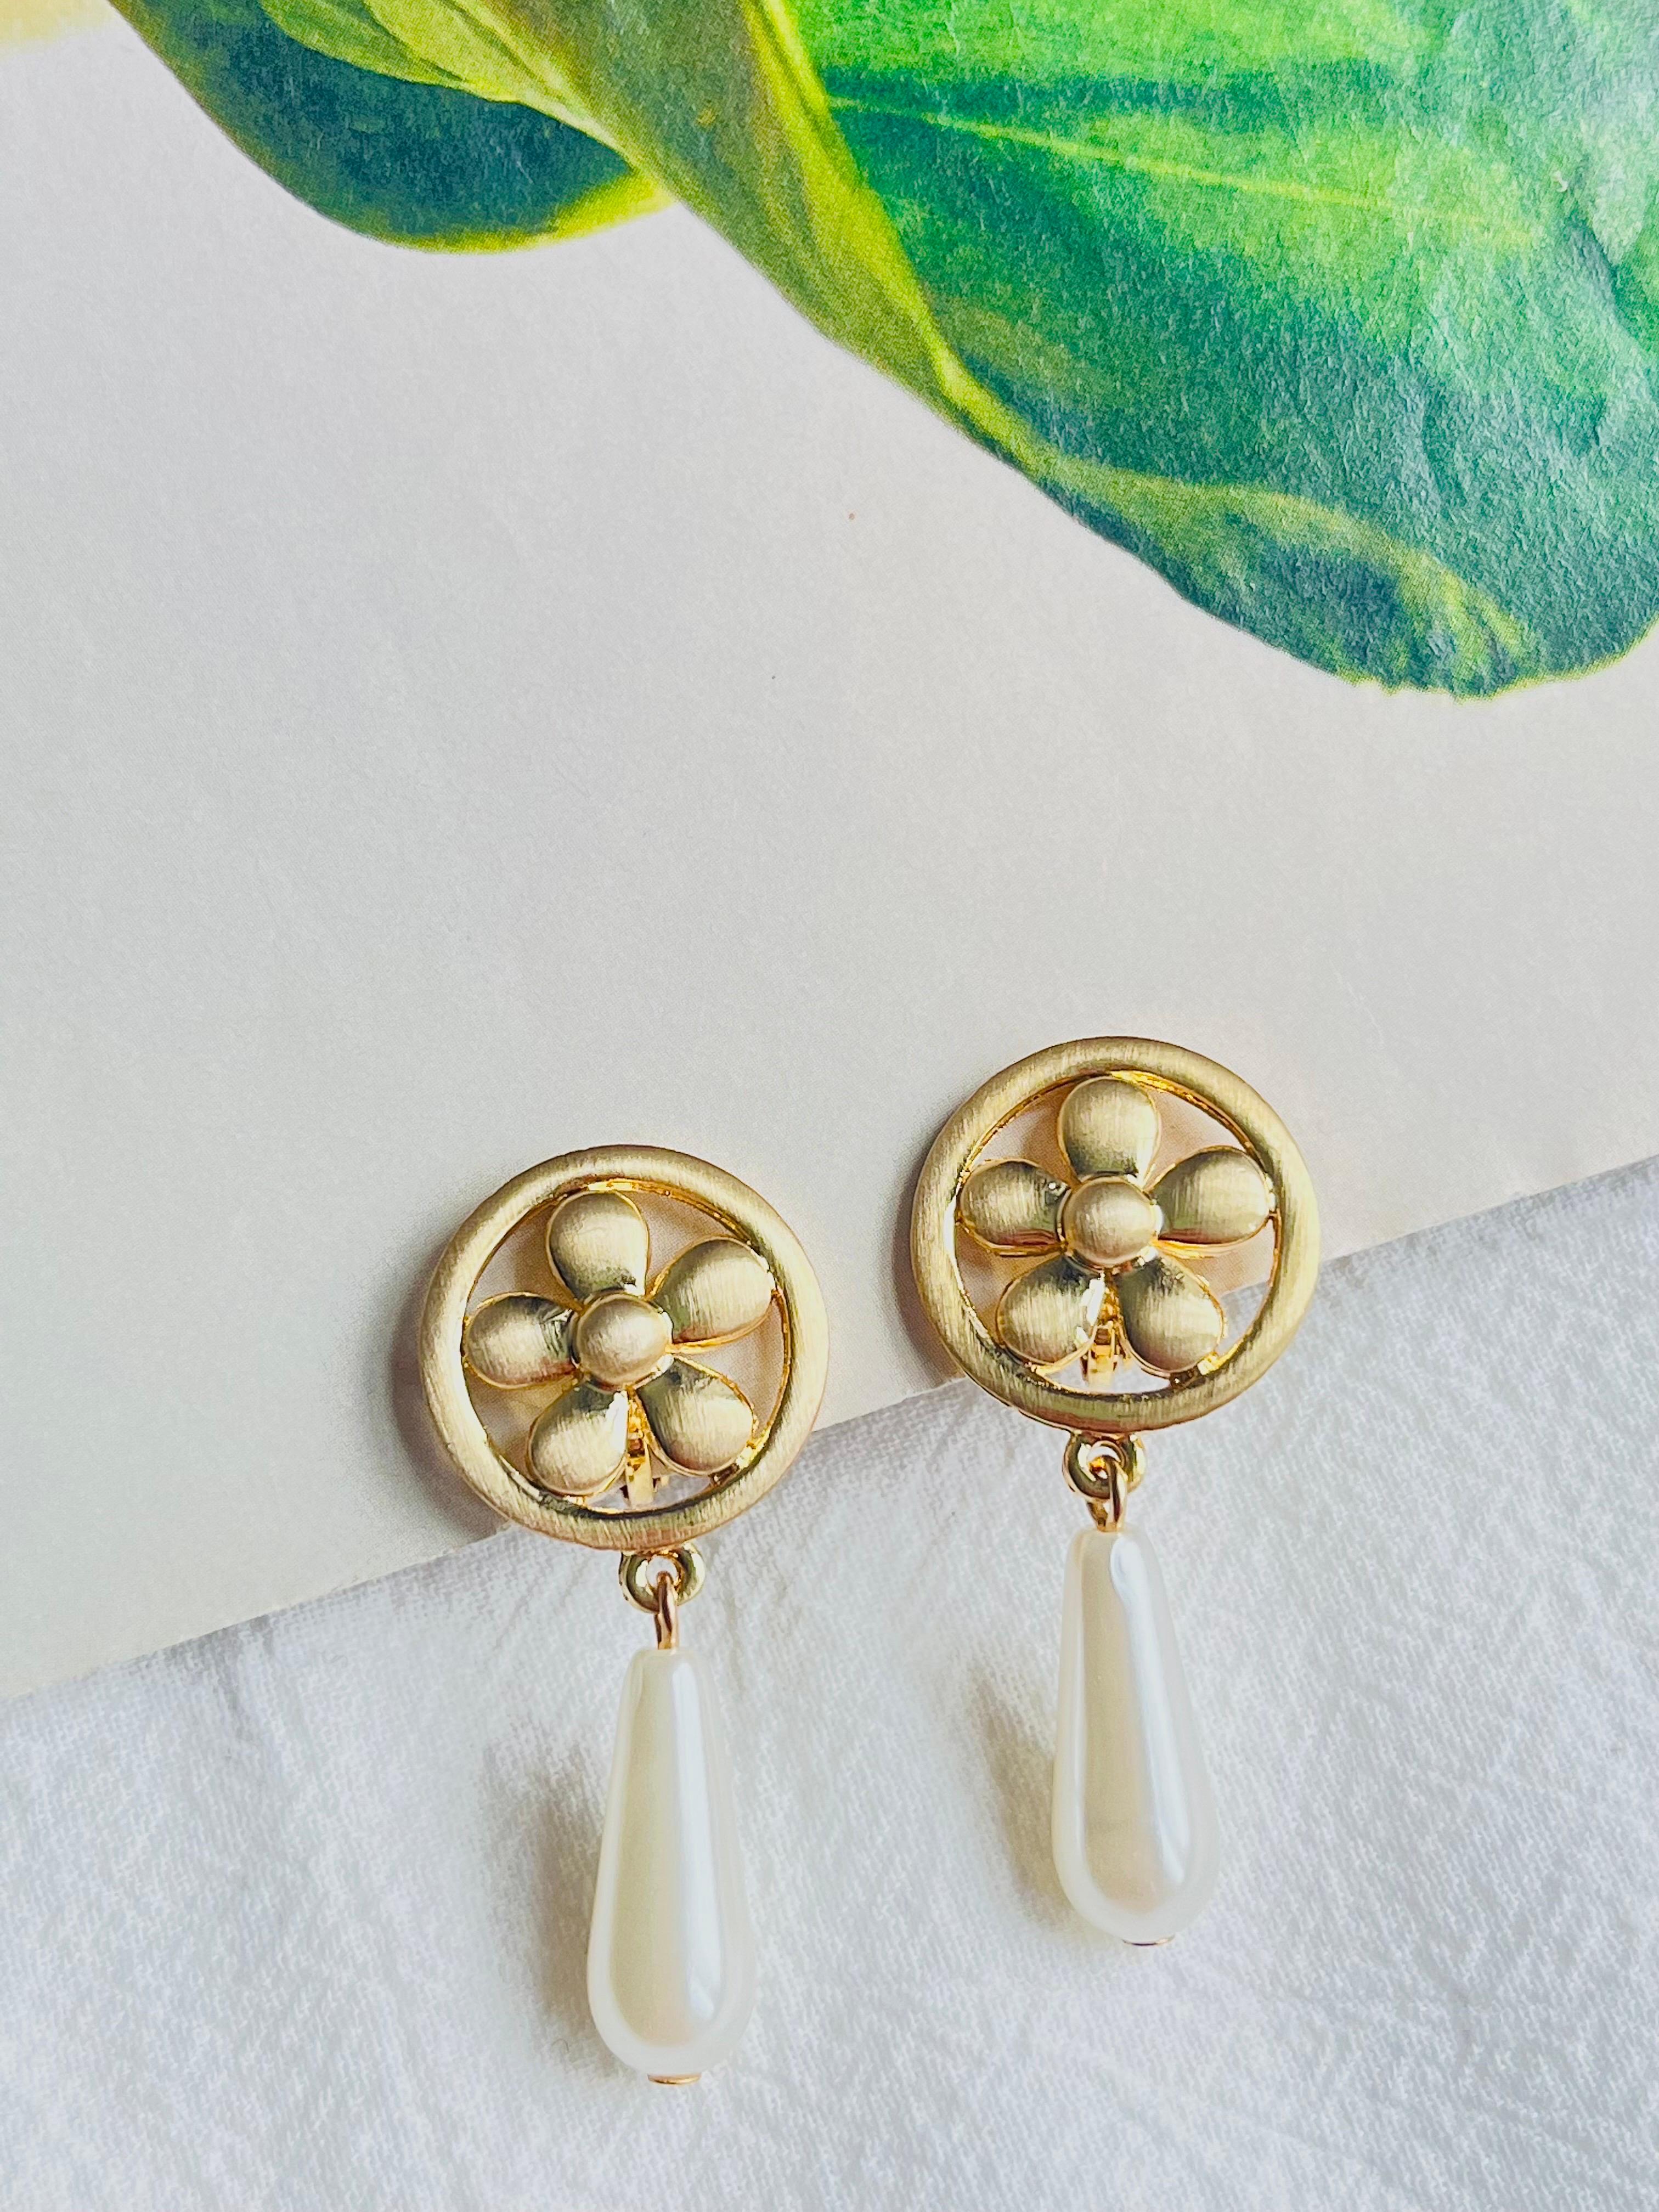 Flower Daisy Round Openwork Long Water Drop White Pearl Pierced Earrings, Gold Tone, Swarovski Element

100% handmade. Excellent gift for lady. High cost and quality.

Material: Faux pearls, Gold plated metal.

Size: 4.5*1.9 cm.

Weight: 5 g/each.
_